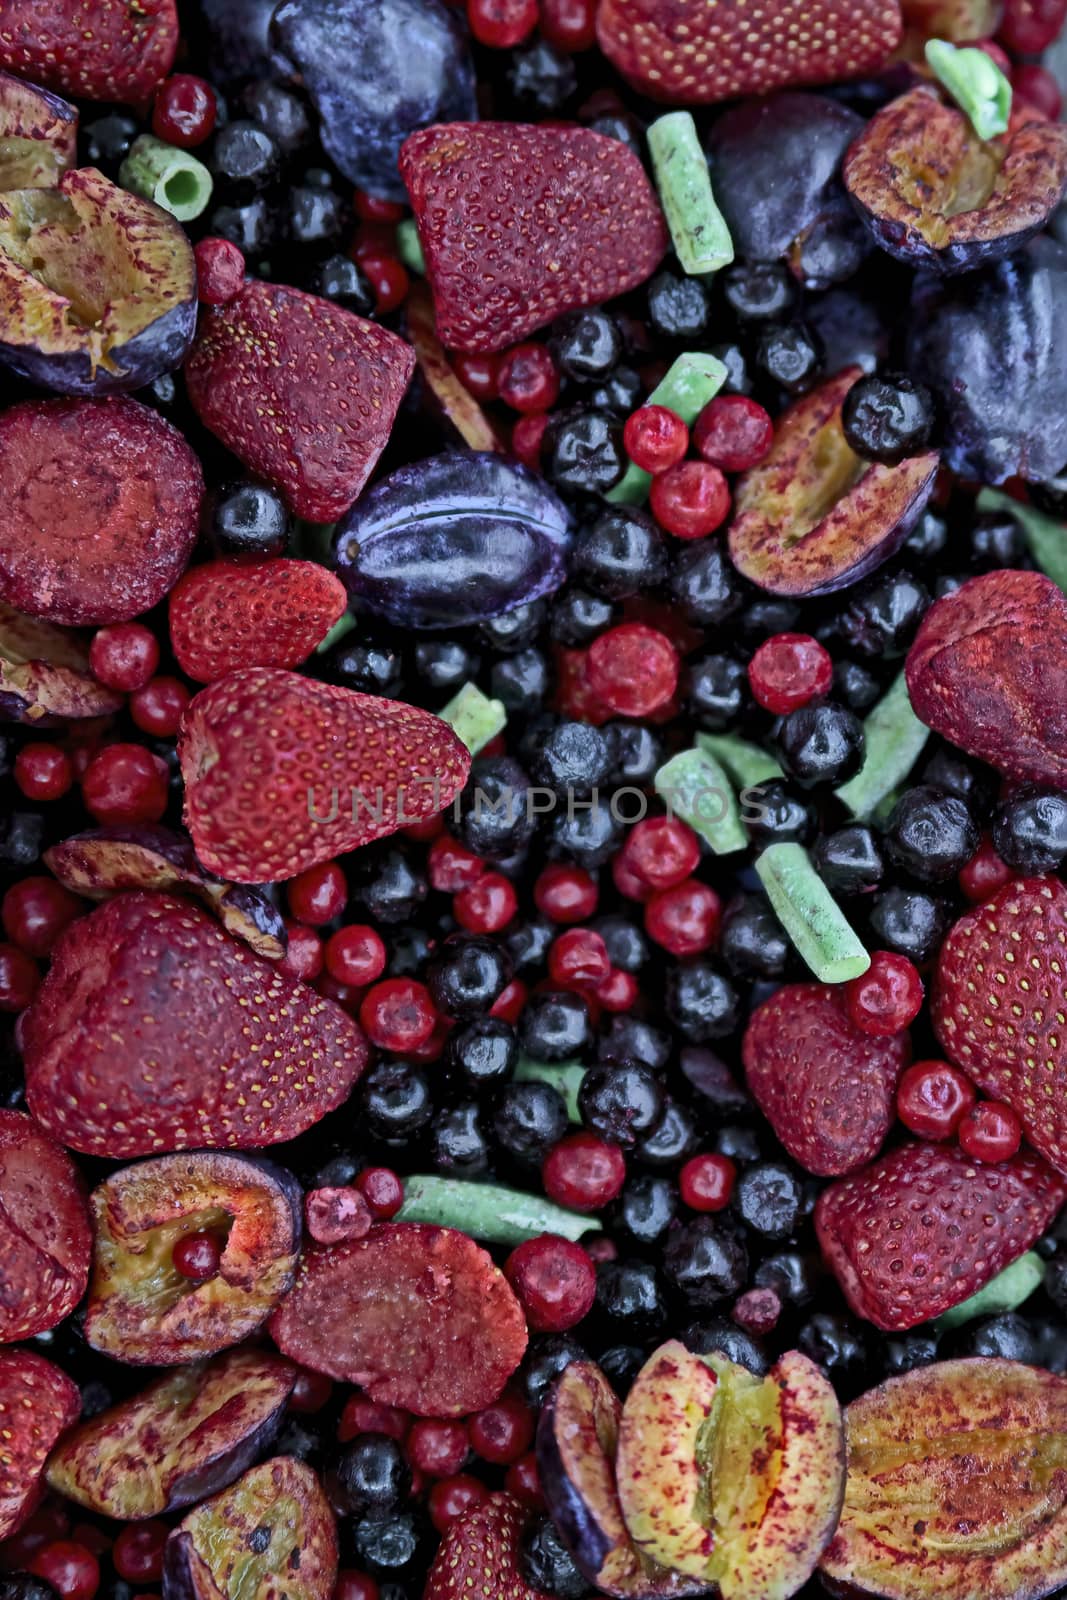 Frozen berries in grocery store shot close-up, blurred background. by bonilook